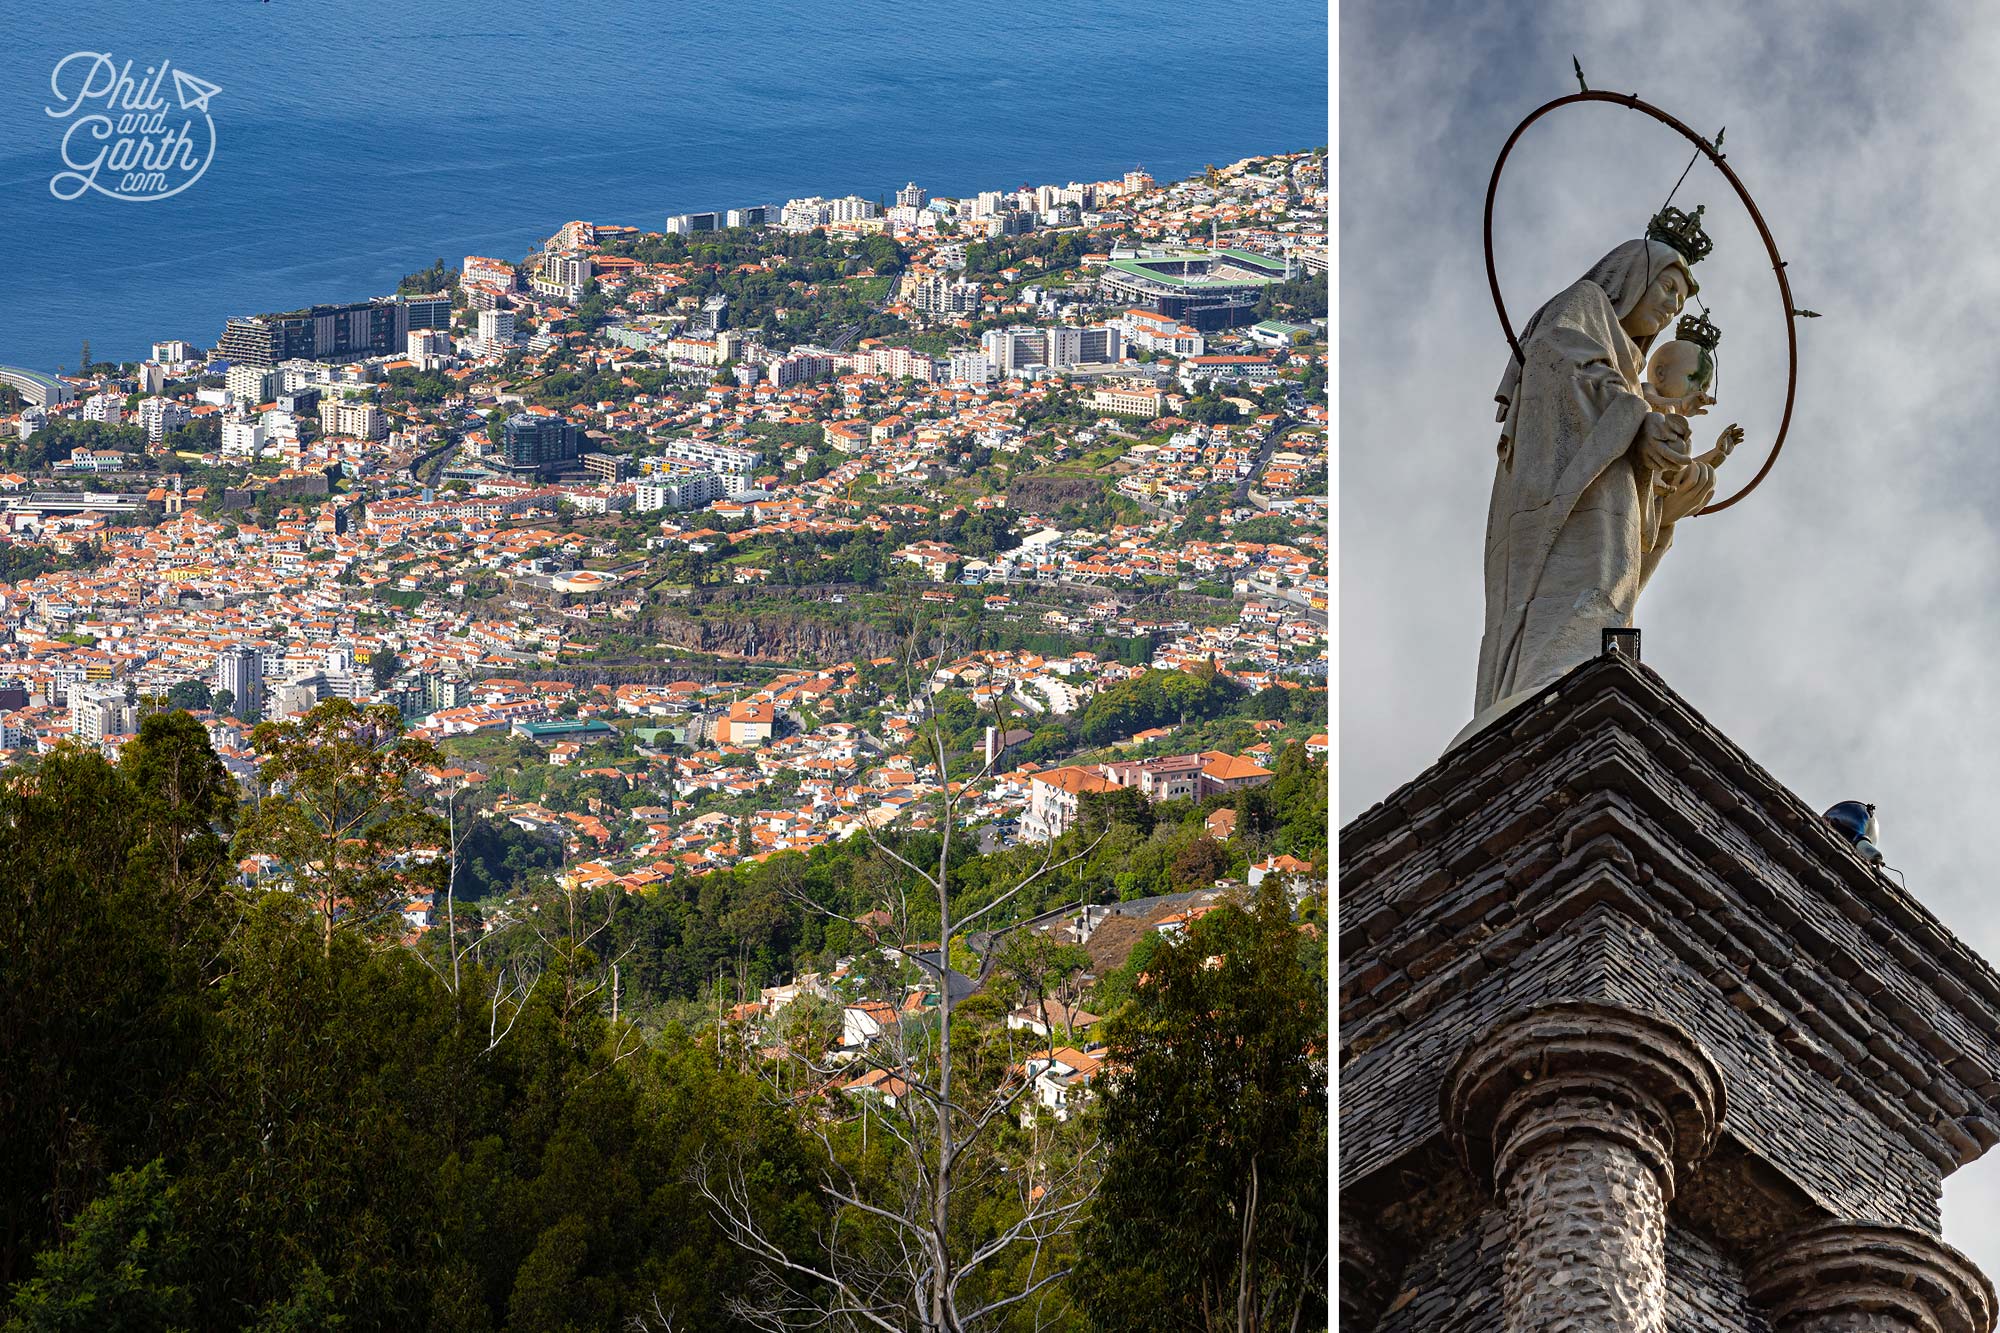 First stop at the Sanctuary of Our Lady of Peace for some epic views over Funchal